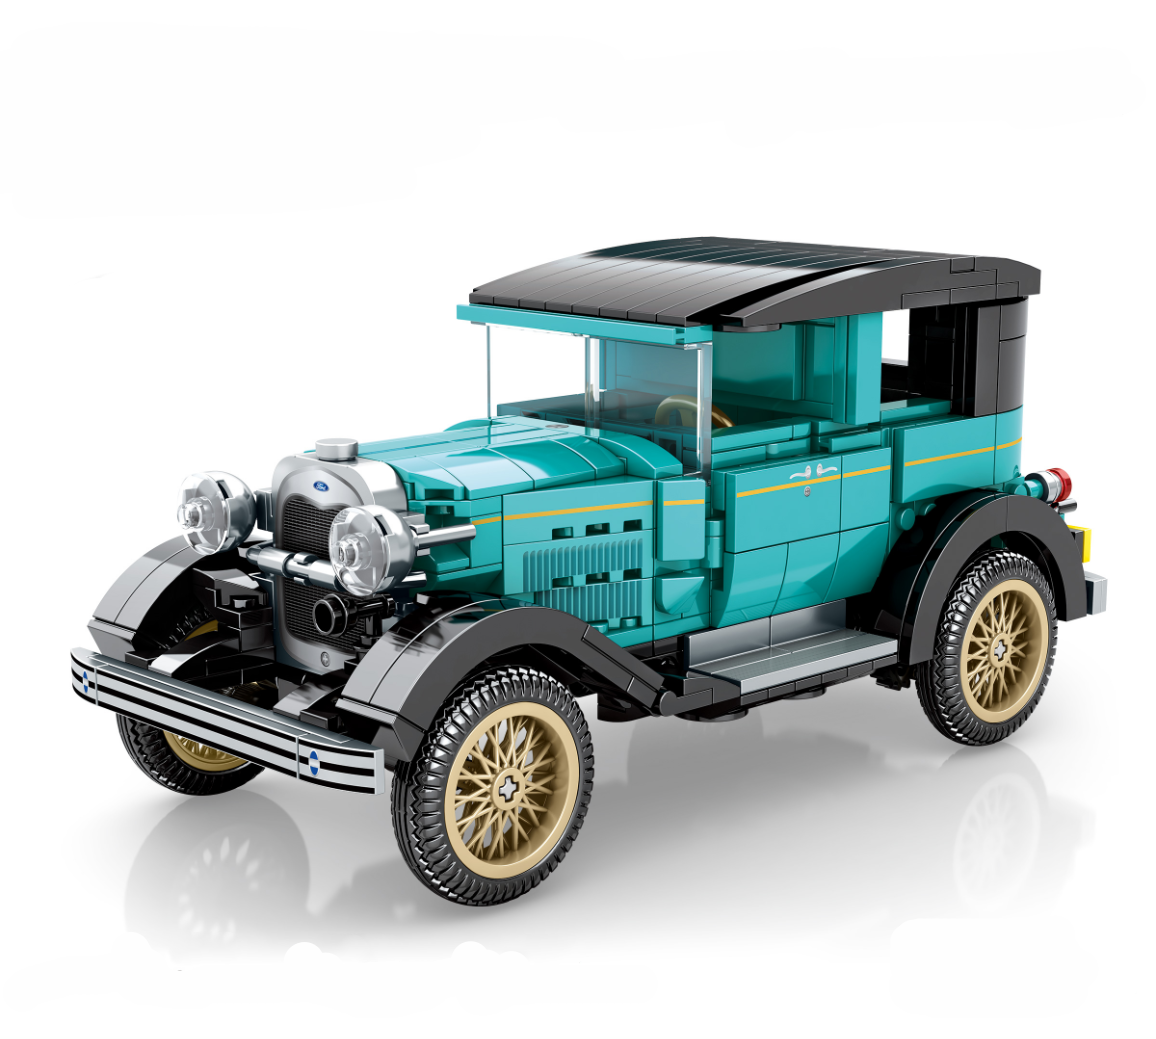 Конструктор SEMBO BLOCK Ford 1930 Model A, 659 деталей, 705807 new welly 1 24 ford 2015 f 150 car model regular cab pickup truck simulated alloy toys car model hobbies collect ornaments gift